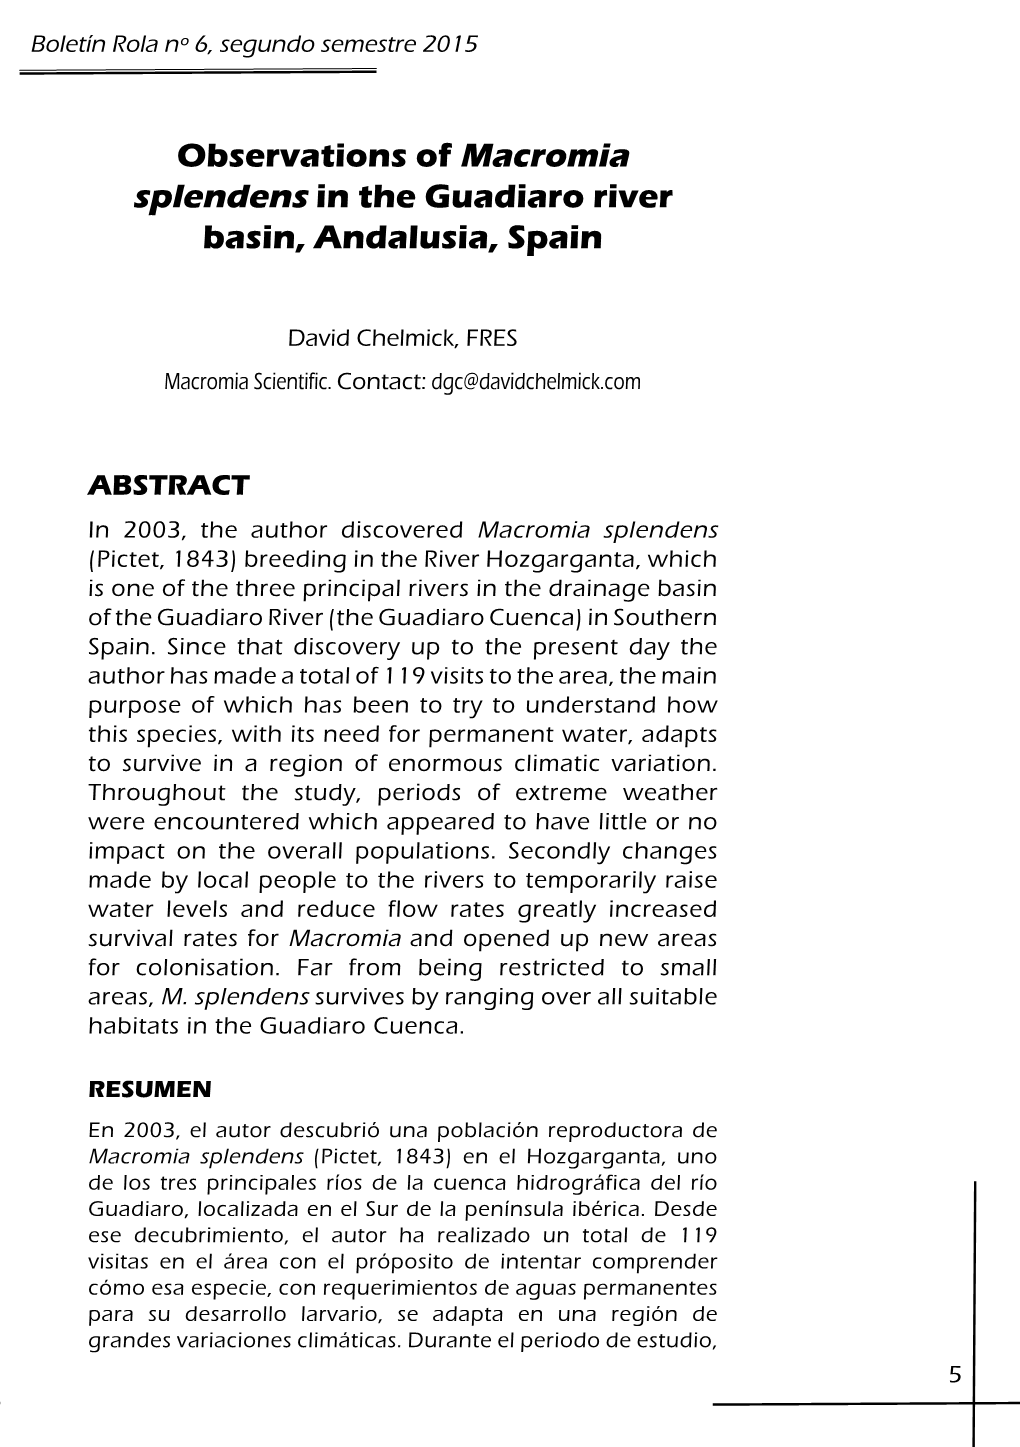 Observations of Macromia Splendens in the Guadiaro River Basin, Andalusia, Spain